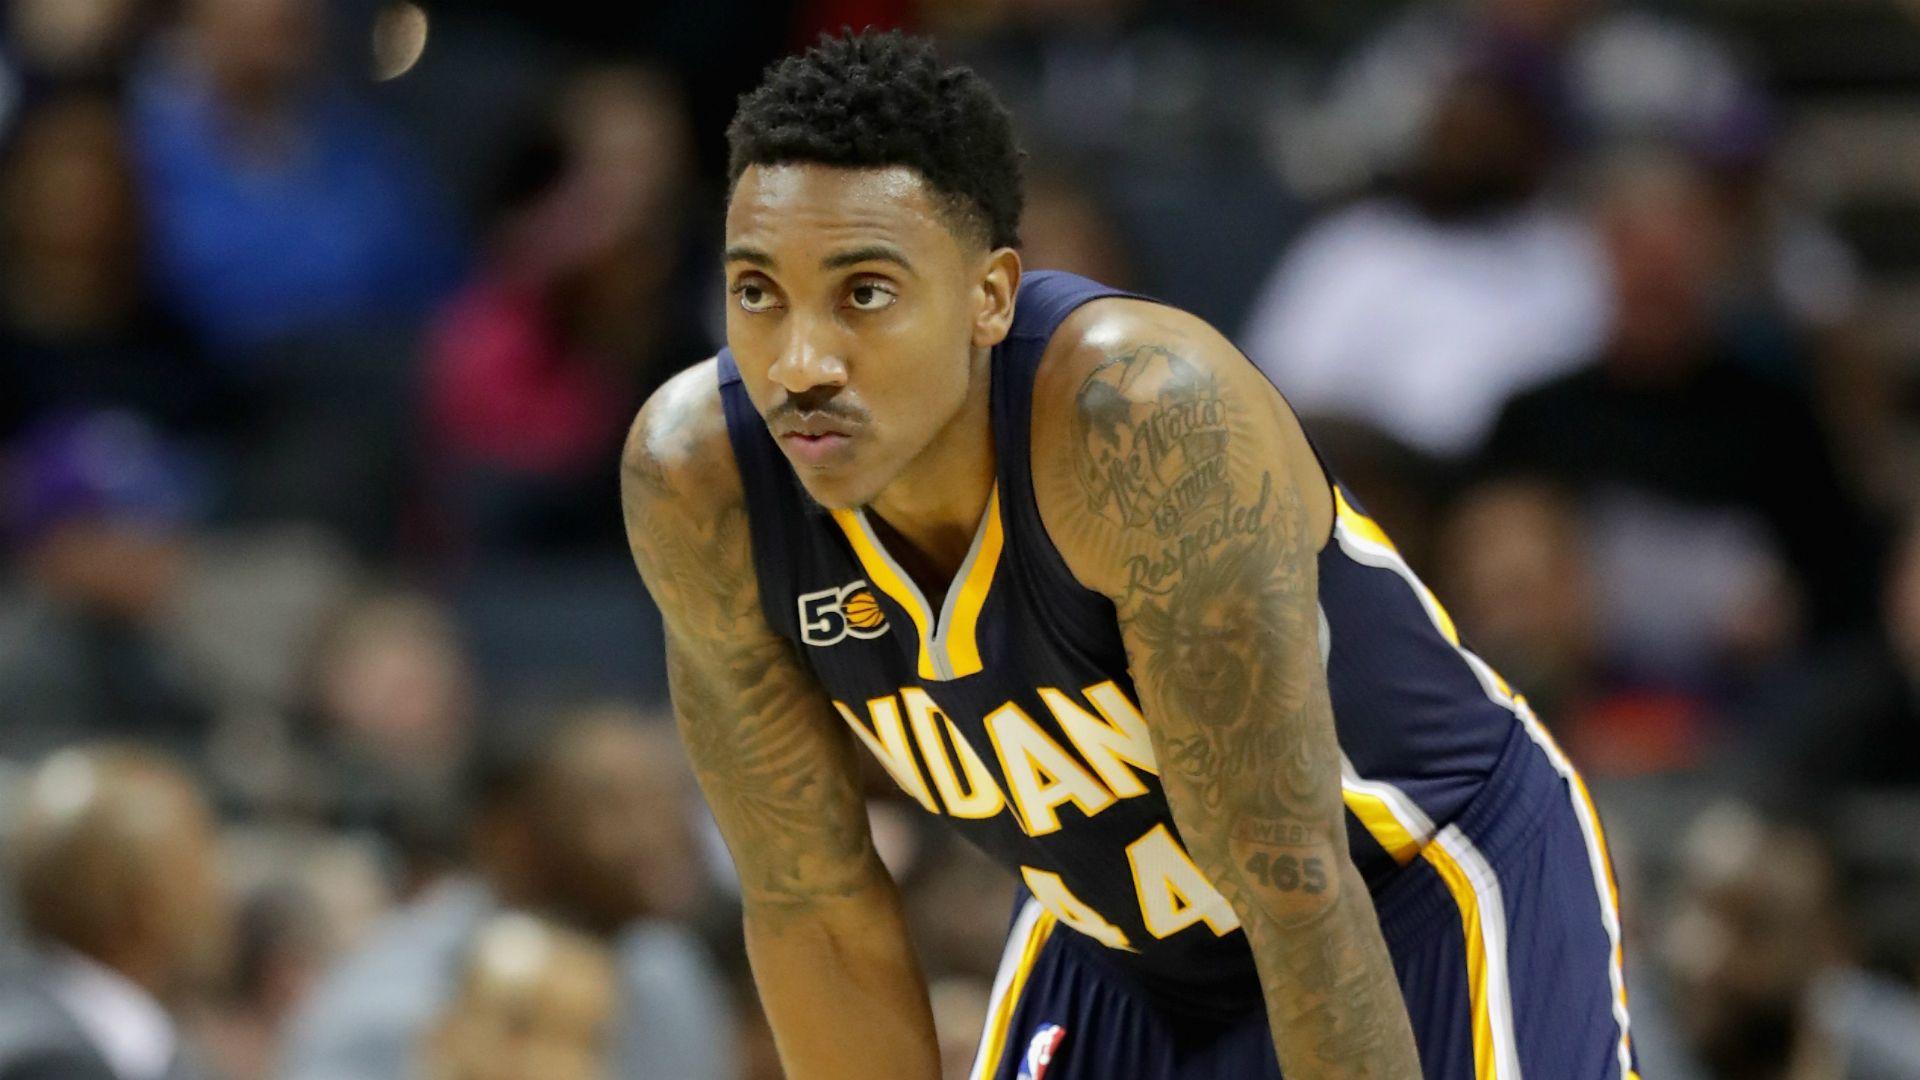 Jeff Teague plans to join Jimmy Butler with the Wolves